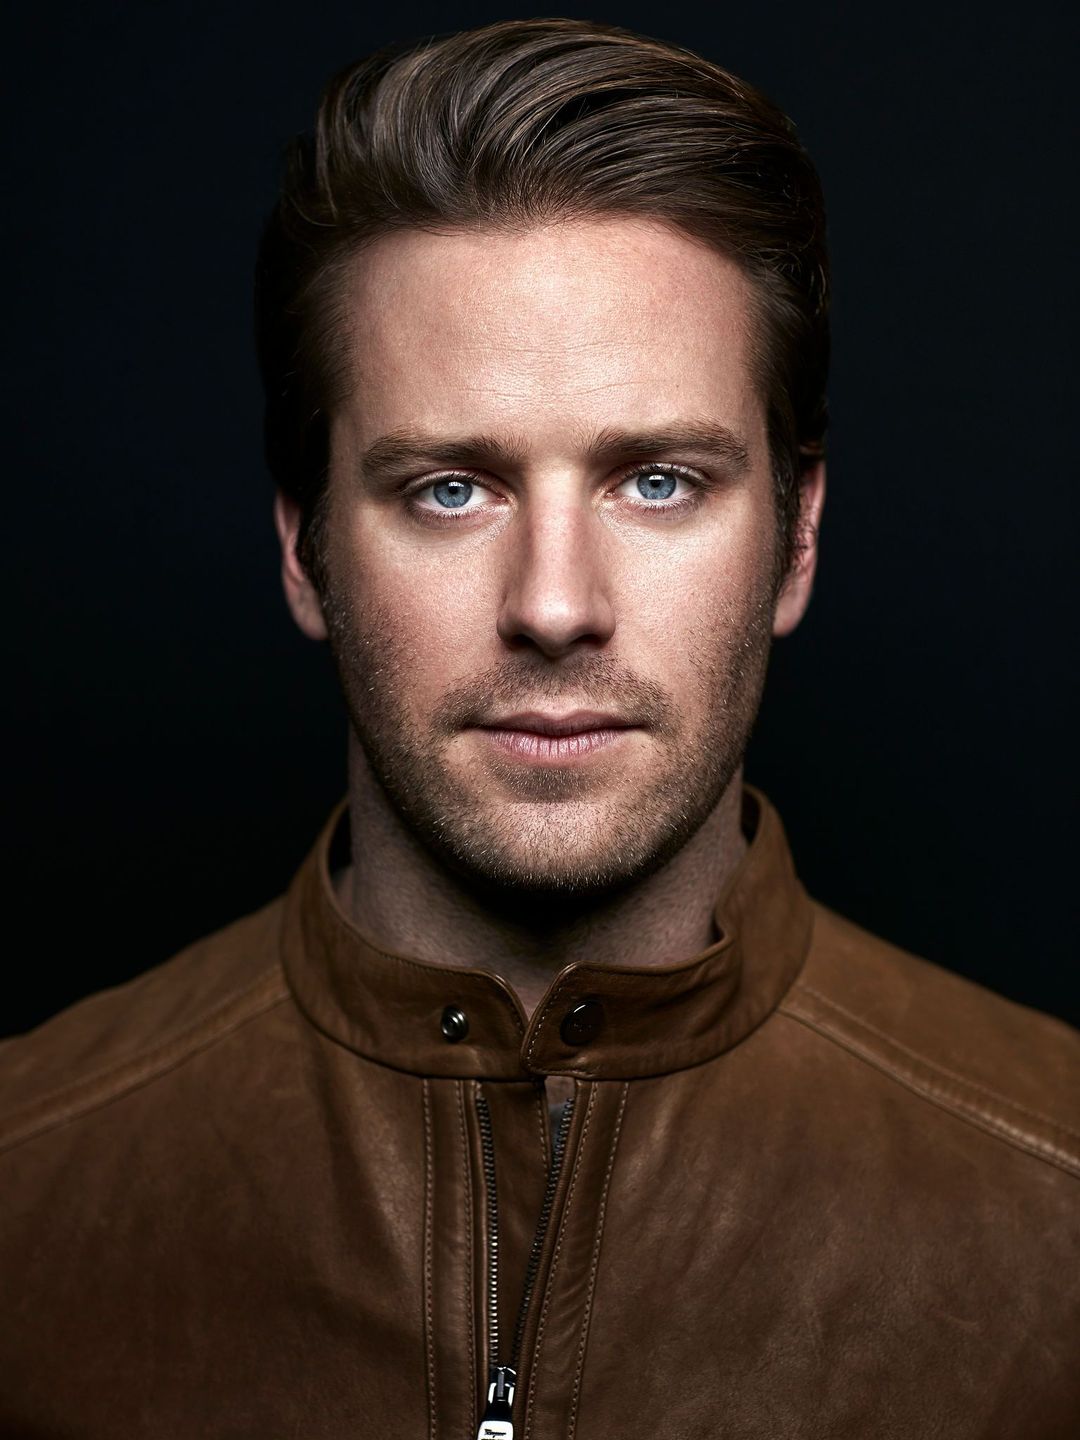 Armie Hammer in real life